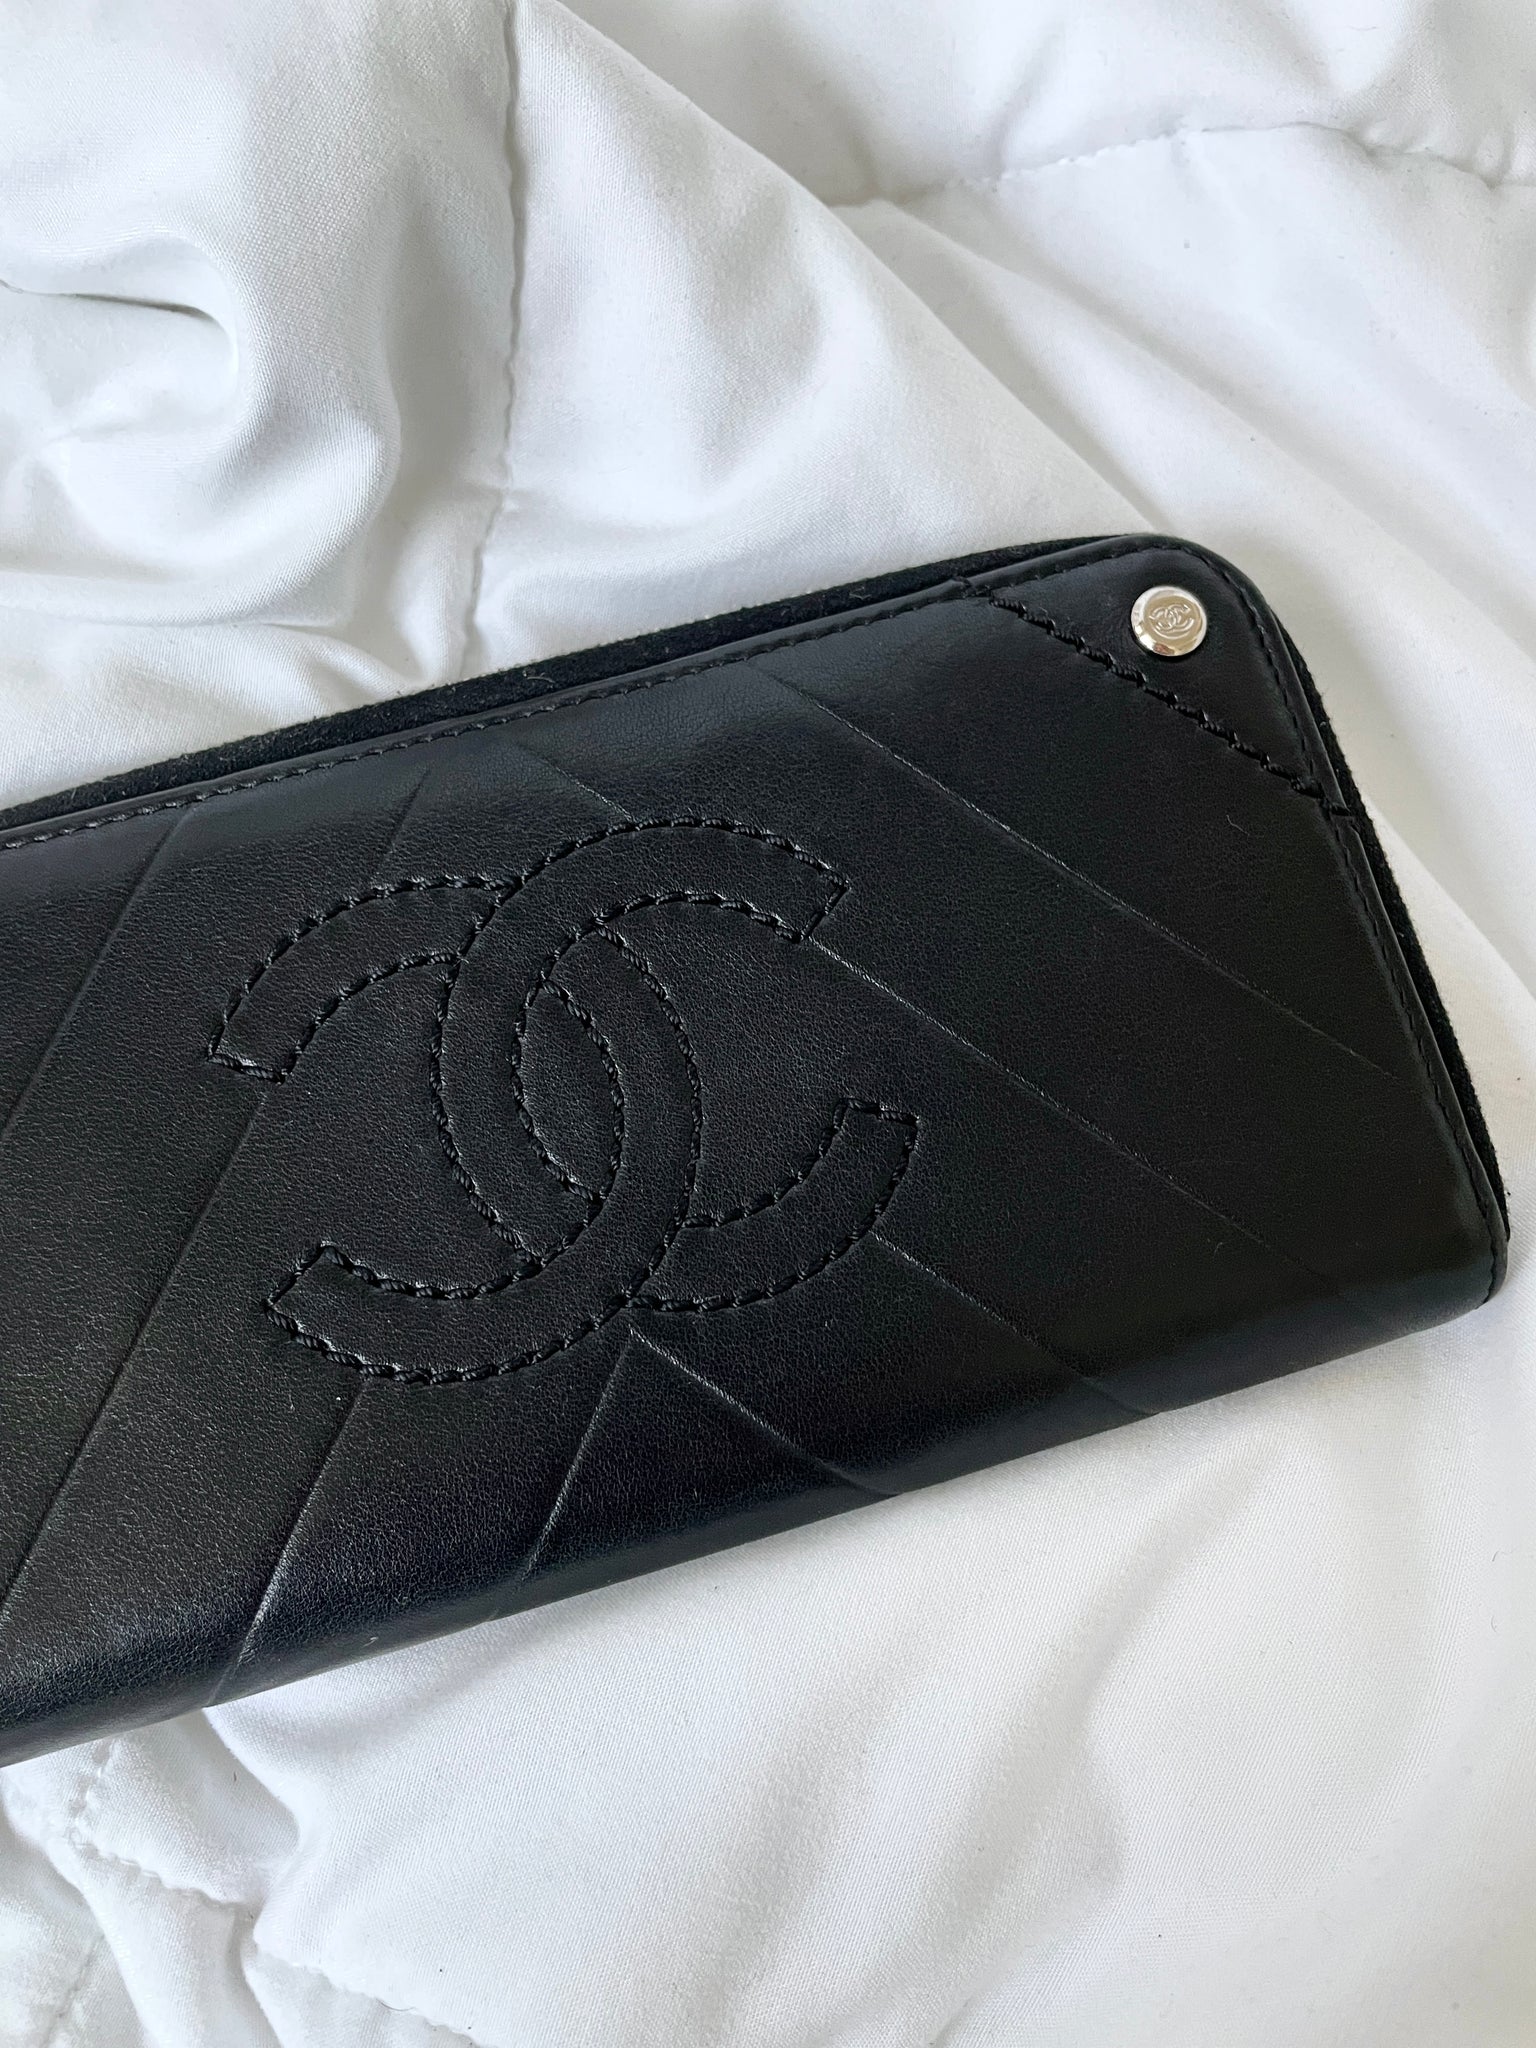 Chanel Lambskin Wallet with Charm